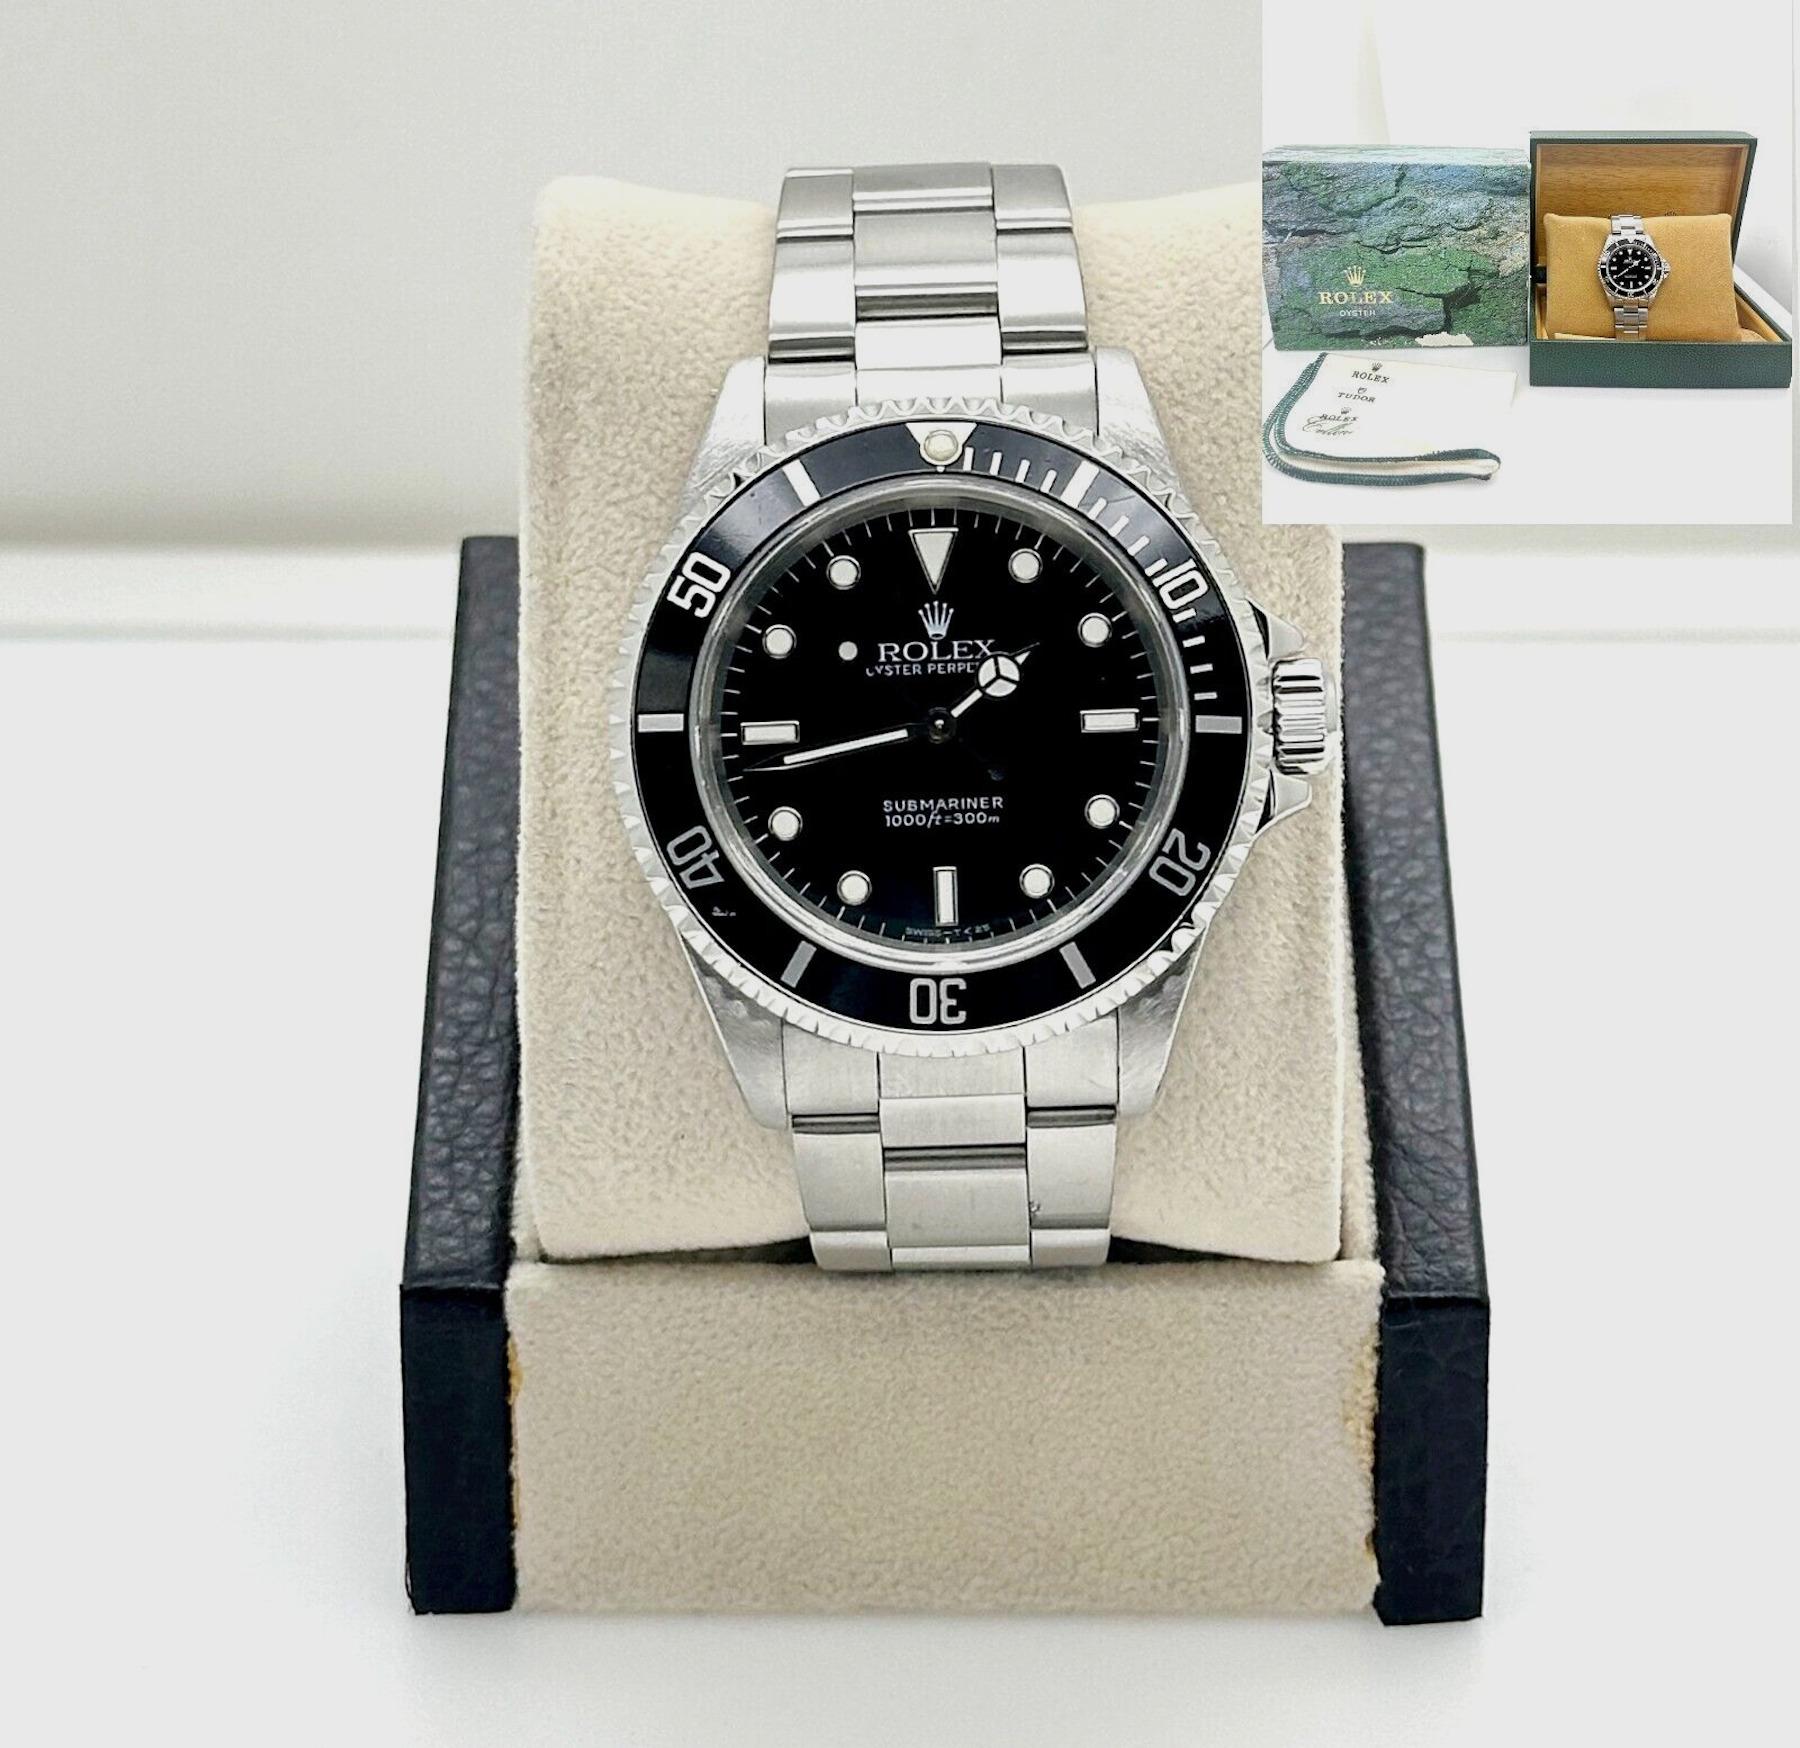 Rolex 14060 Submariner Black Dial Stainless Steel Box 5